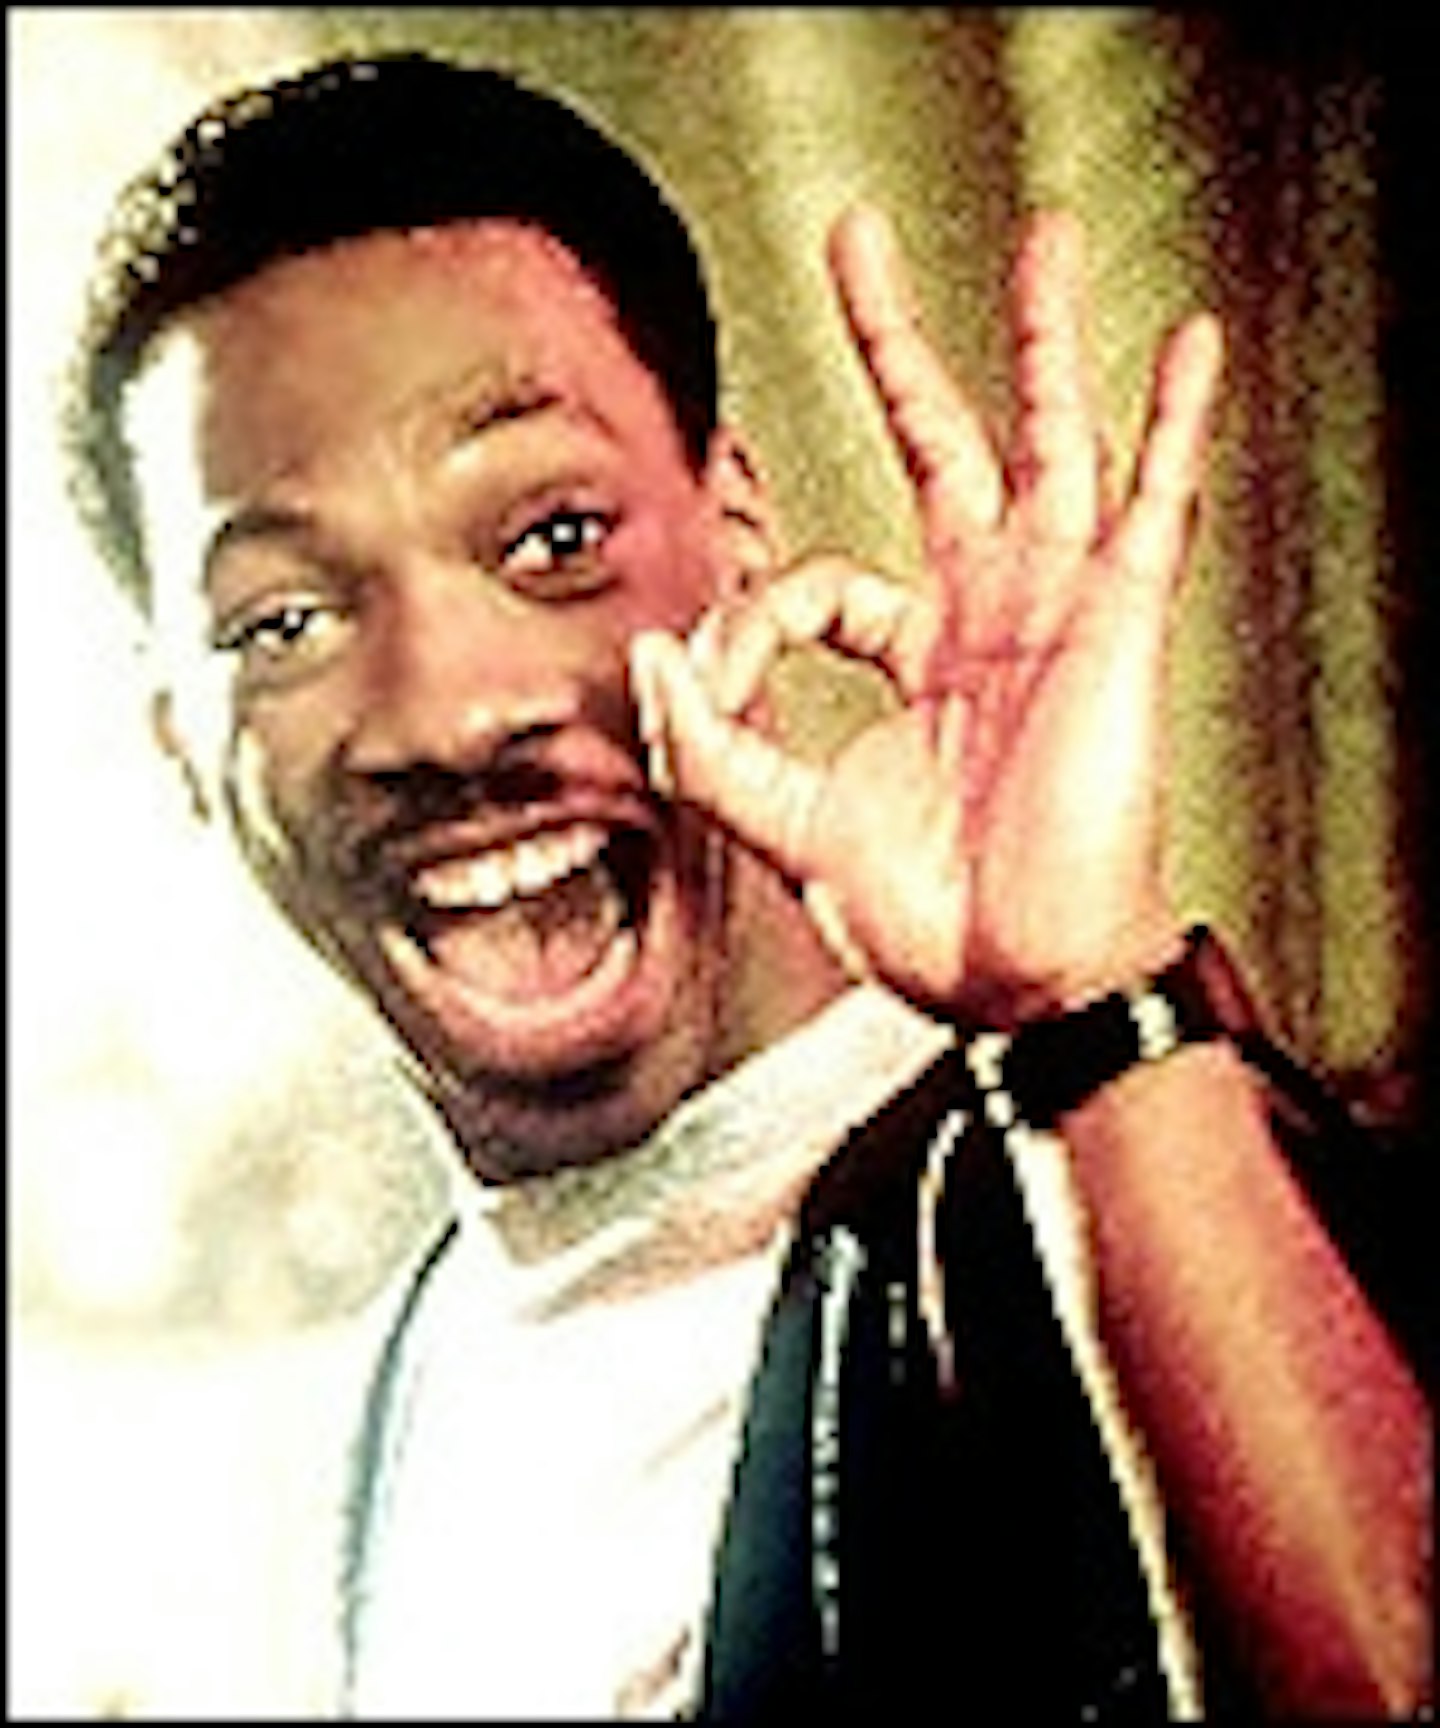 Beverly Hills Cop IV Will Be Rated R